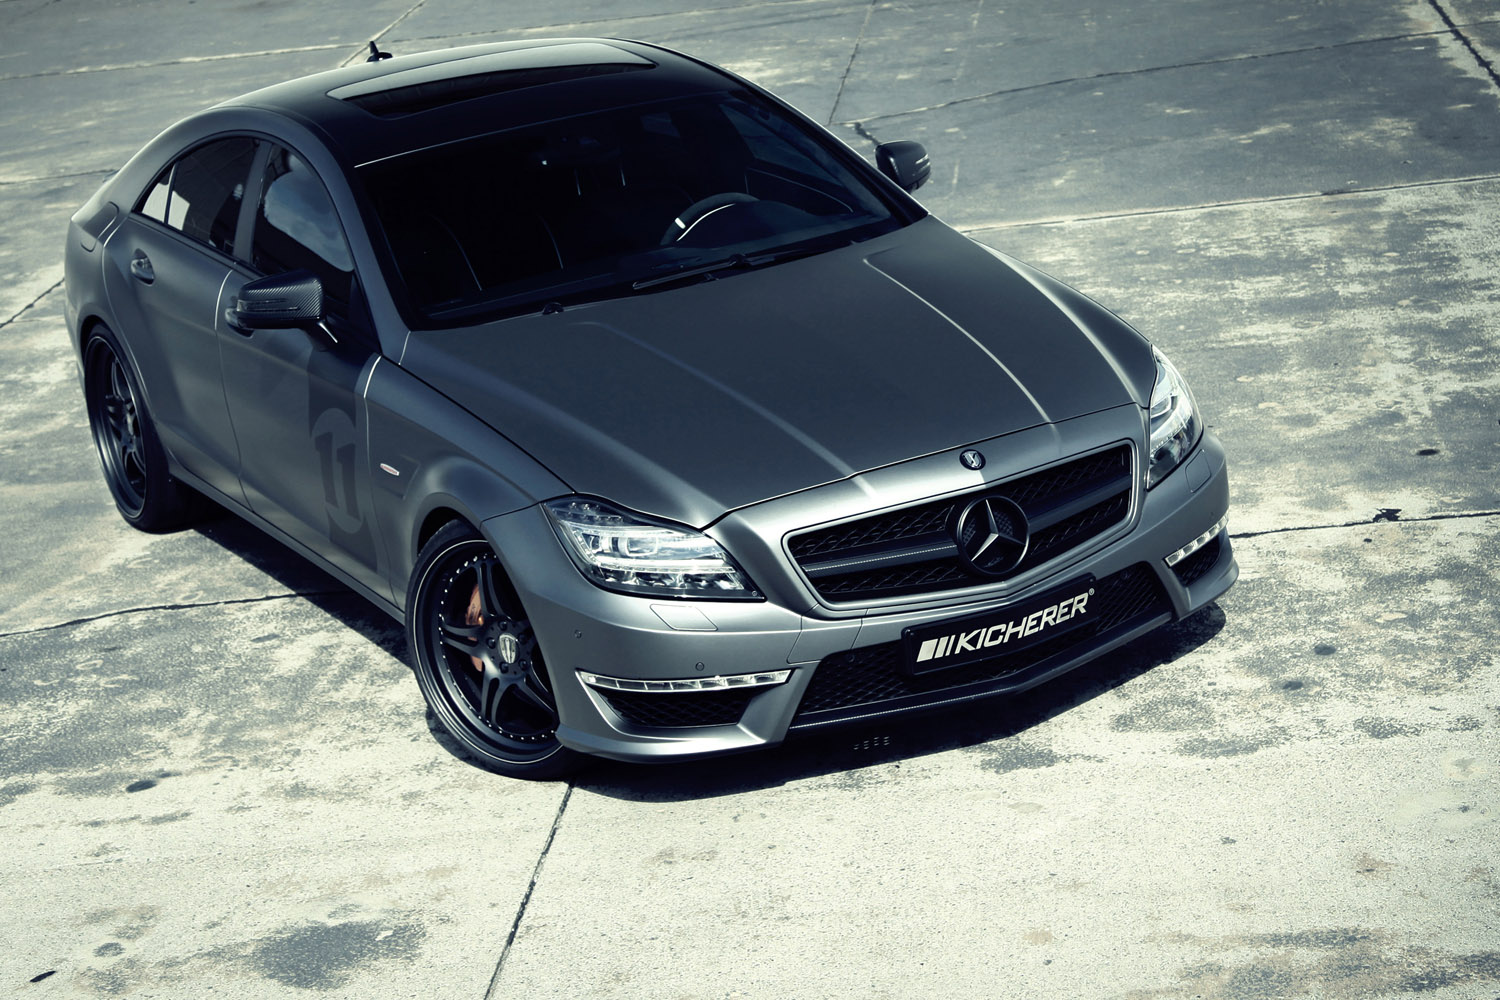 2013, Kicherer, Mercedes, Benz, Cls 63, Amg, Yachting, Cls, Tuning Wallpaper